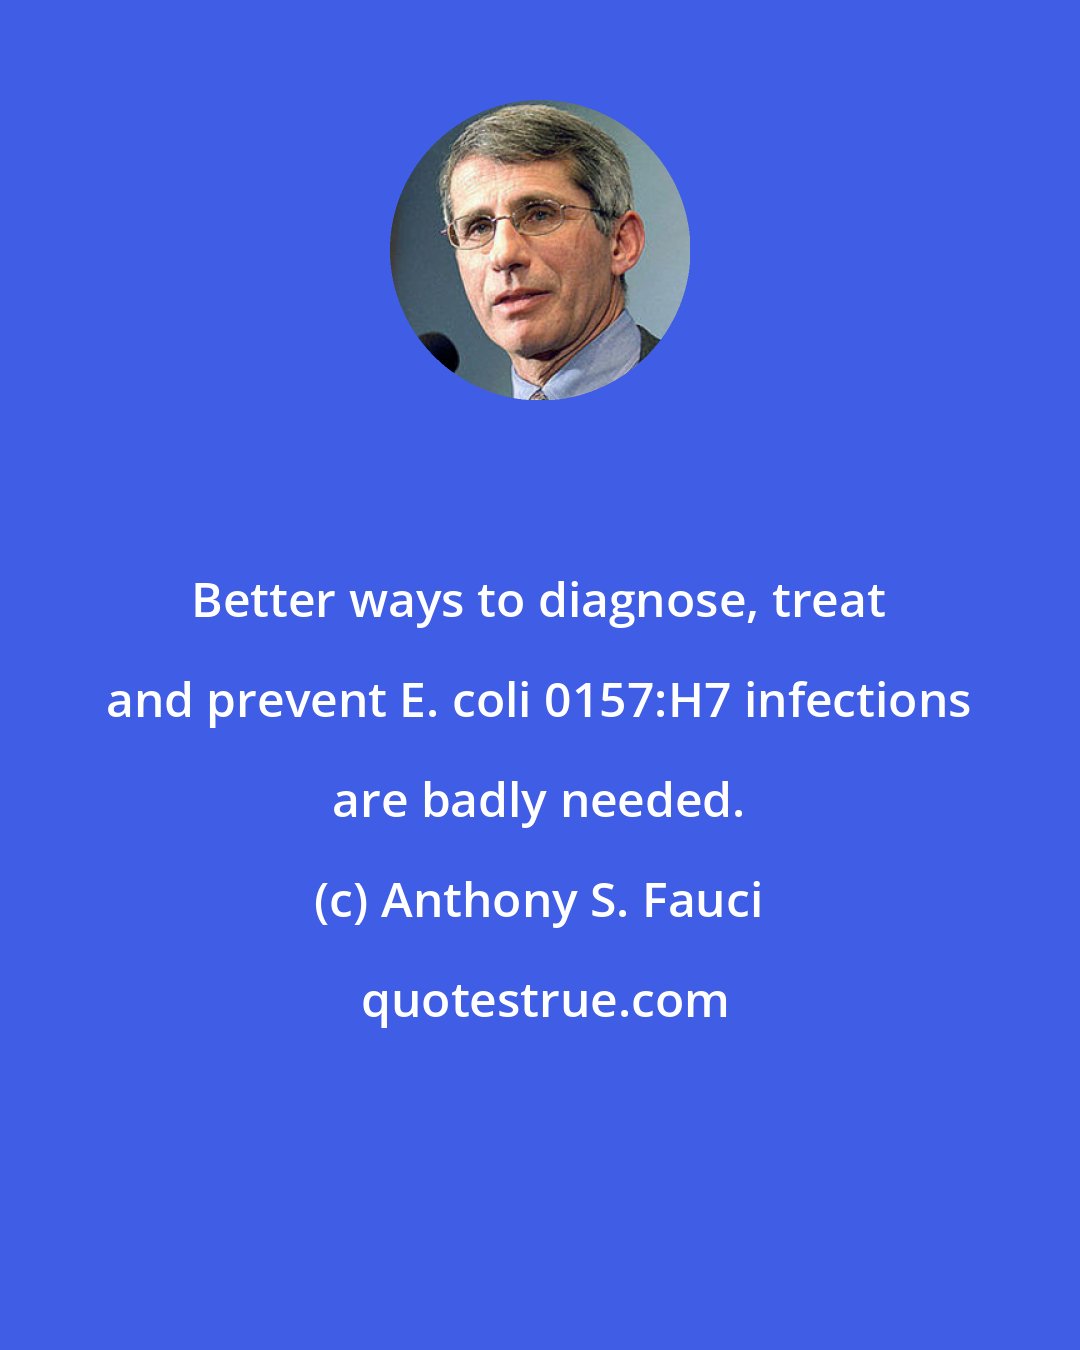 Anthony S. Fauci: Better ways to diagnose, treat and prevent E. coli 0157:H7 infections are badly needed.